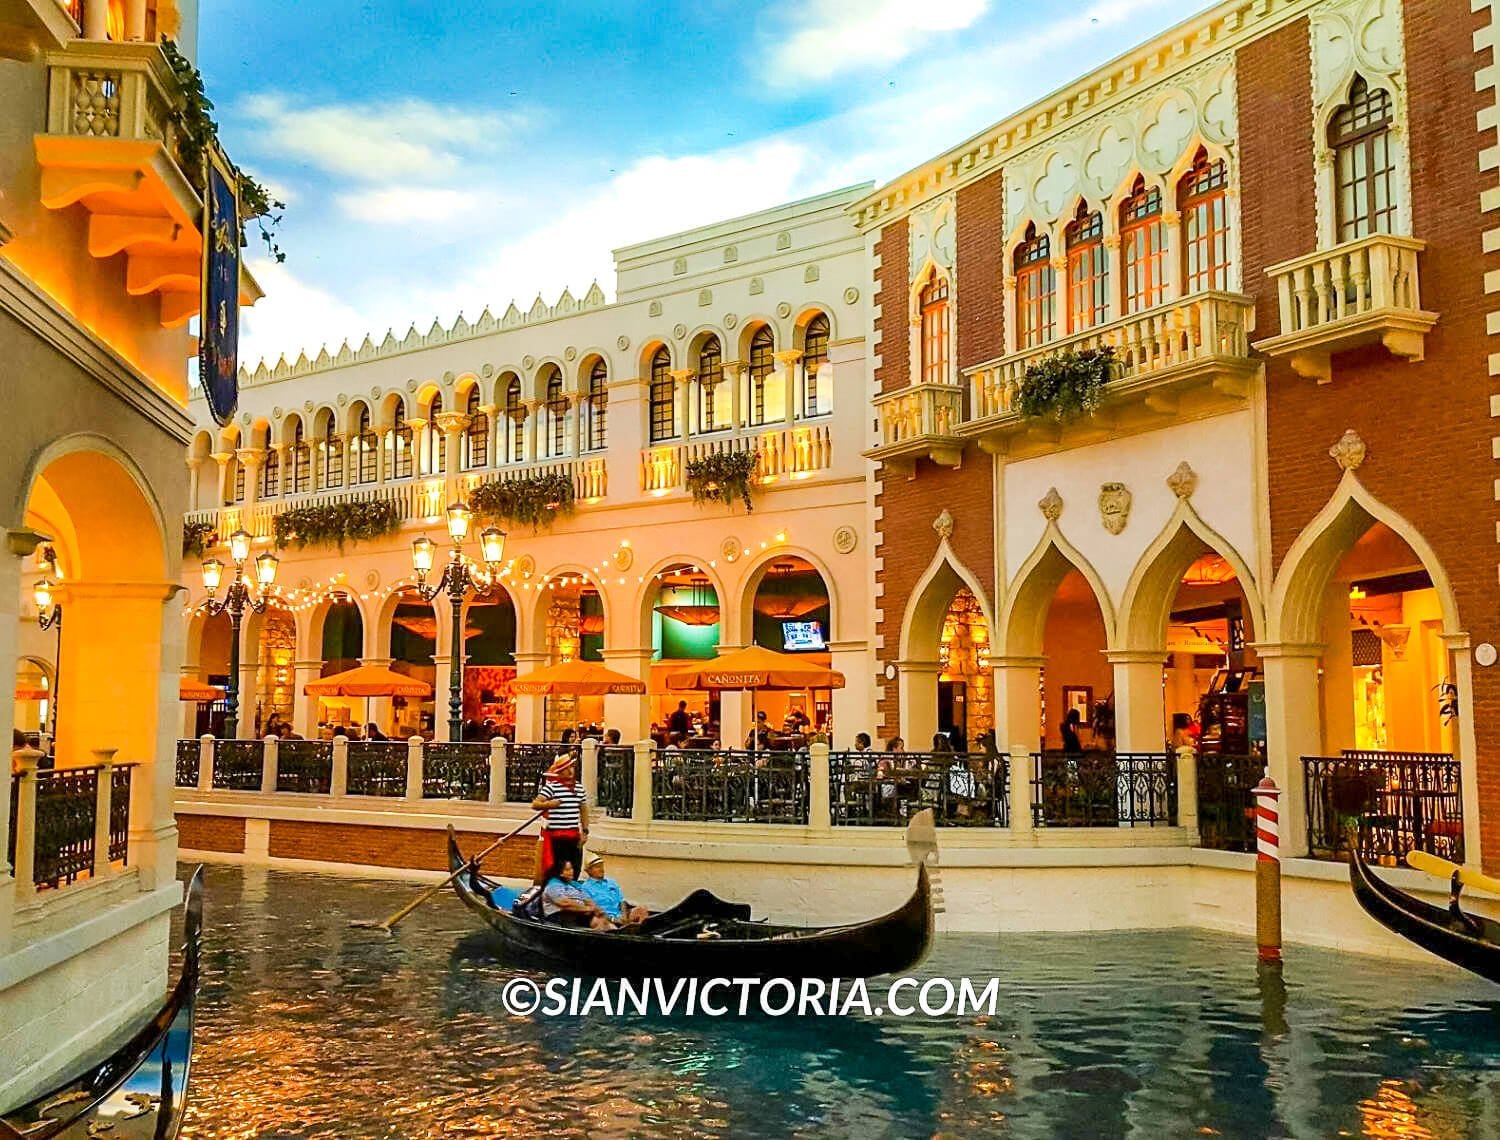 Grand Canal Shoppes in Las Vegas - Tours and Activities